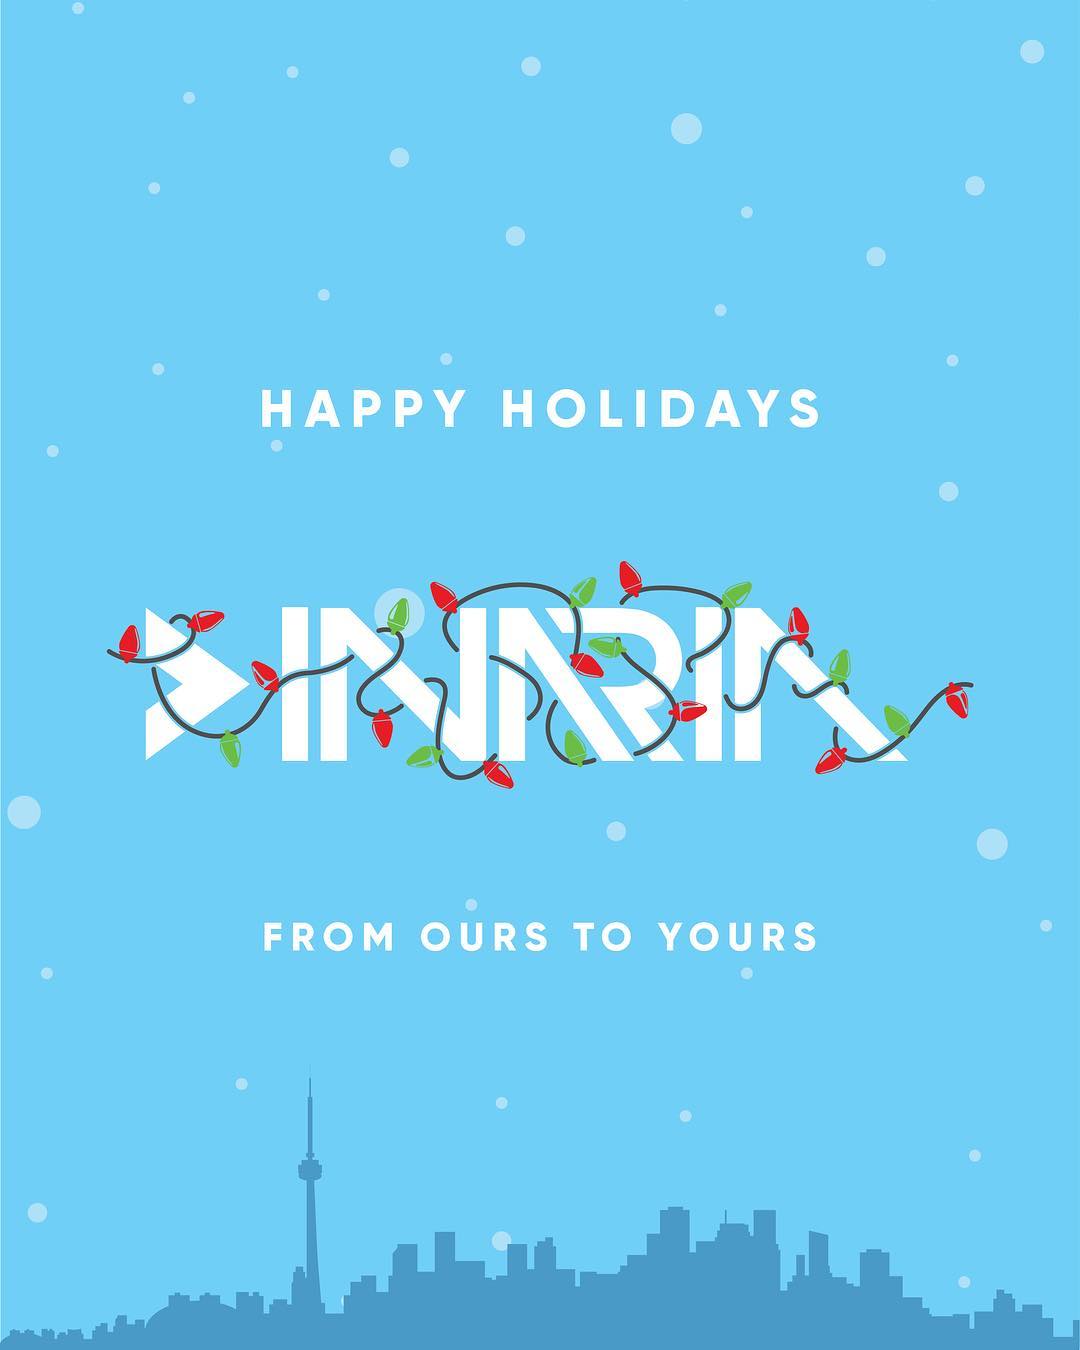 From ours to yours. We’d like to wish everyone a safe & fun filled holiday season! #inariasoccer